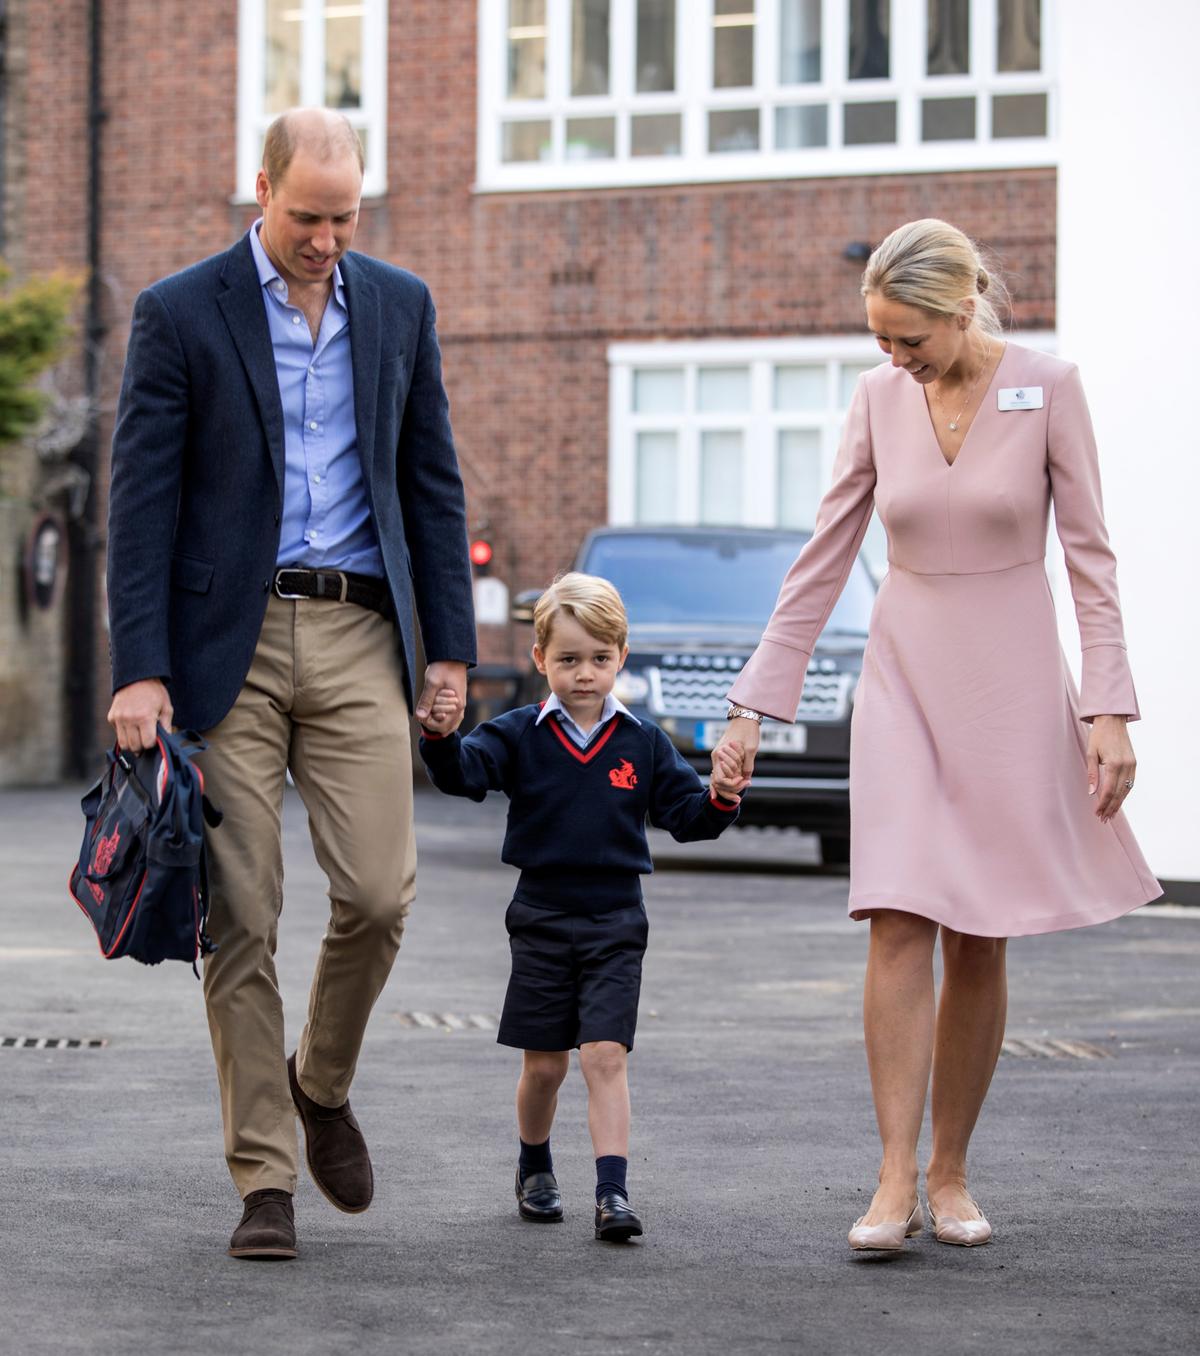 Helen Haslem, head of the lower school and Britain's Prince William hold Prince George's hands as he arrives for his first day of school at Thomas's school in Battersea, London, Sept. 7, 2017. (REUTERS/Richard Pohle/Pool)